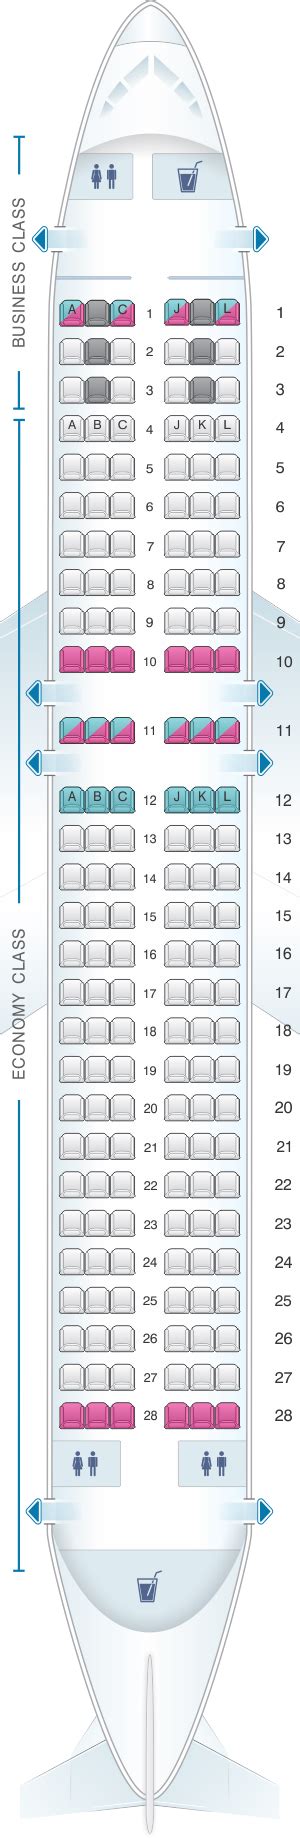 Seat Map For Latam Airlines Airbus A320 200 V2 Jetstar Airways Thai